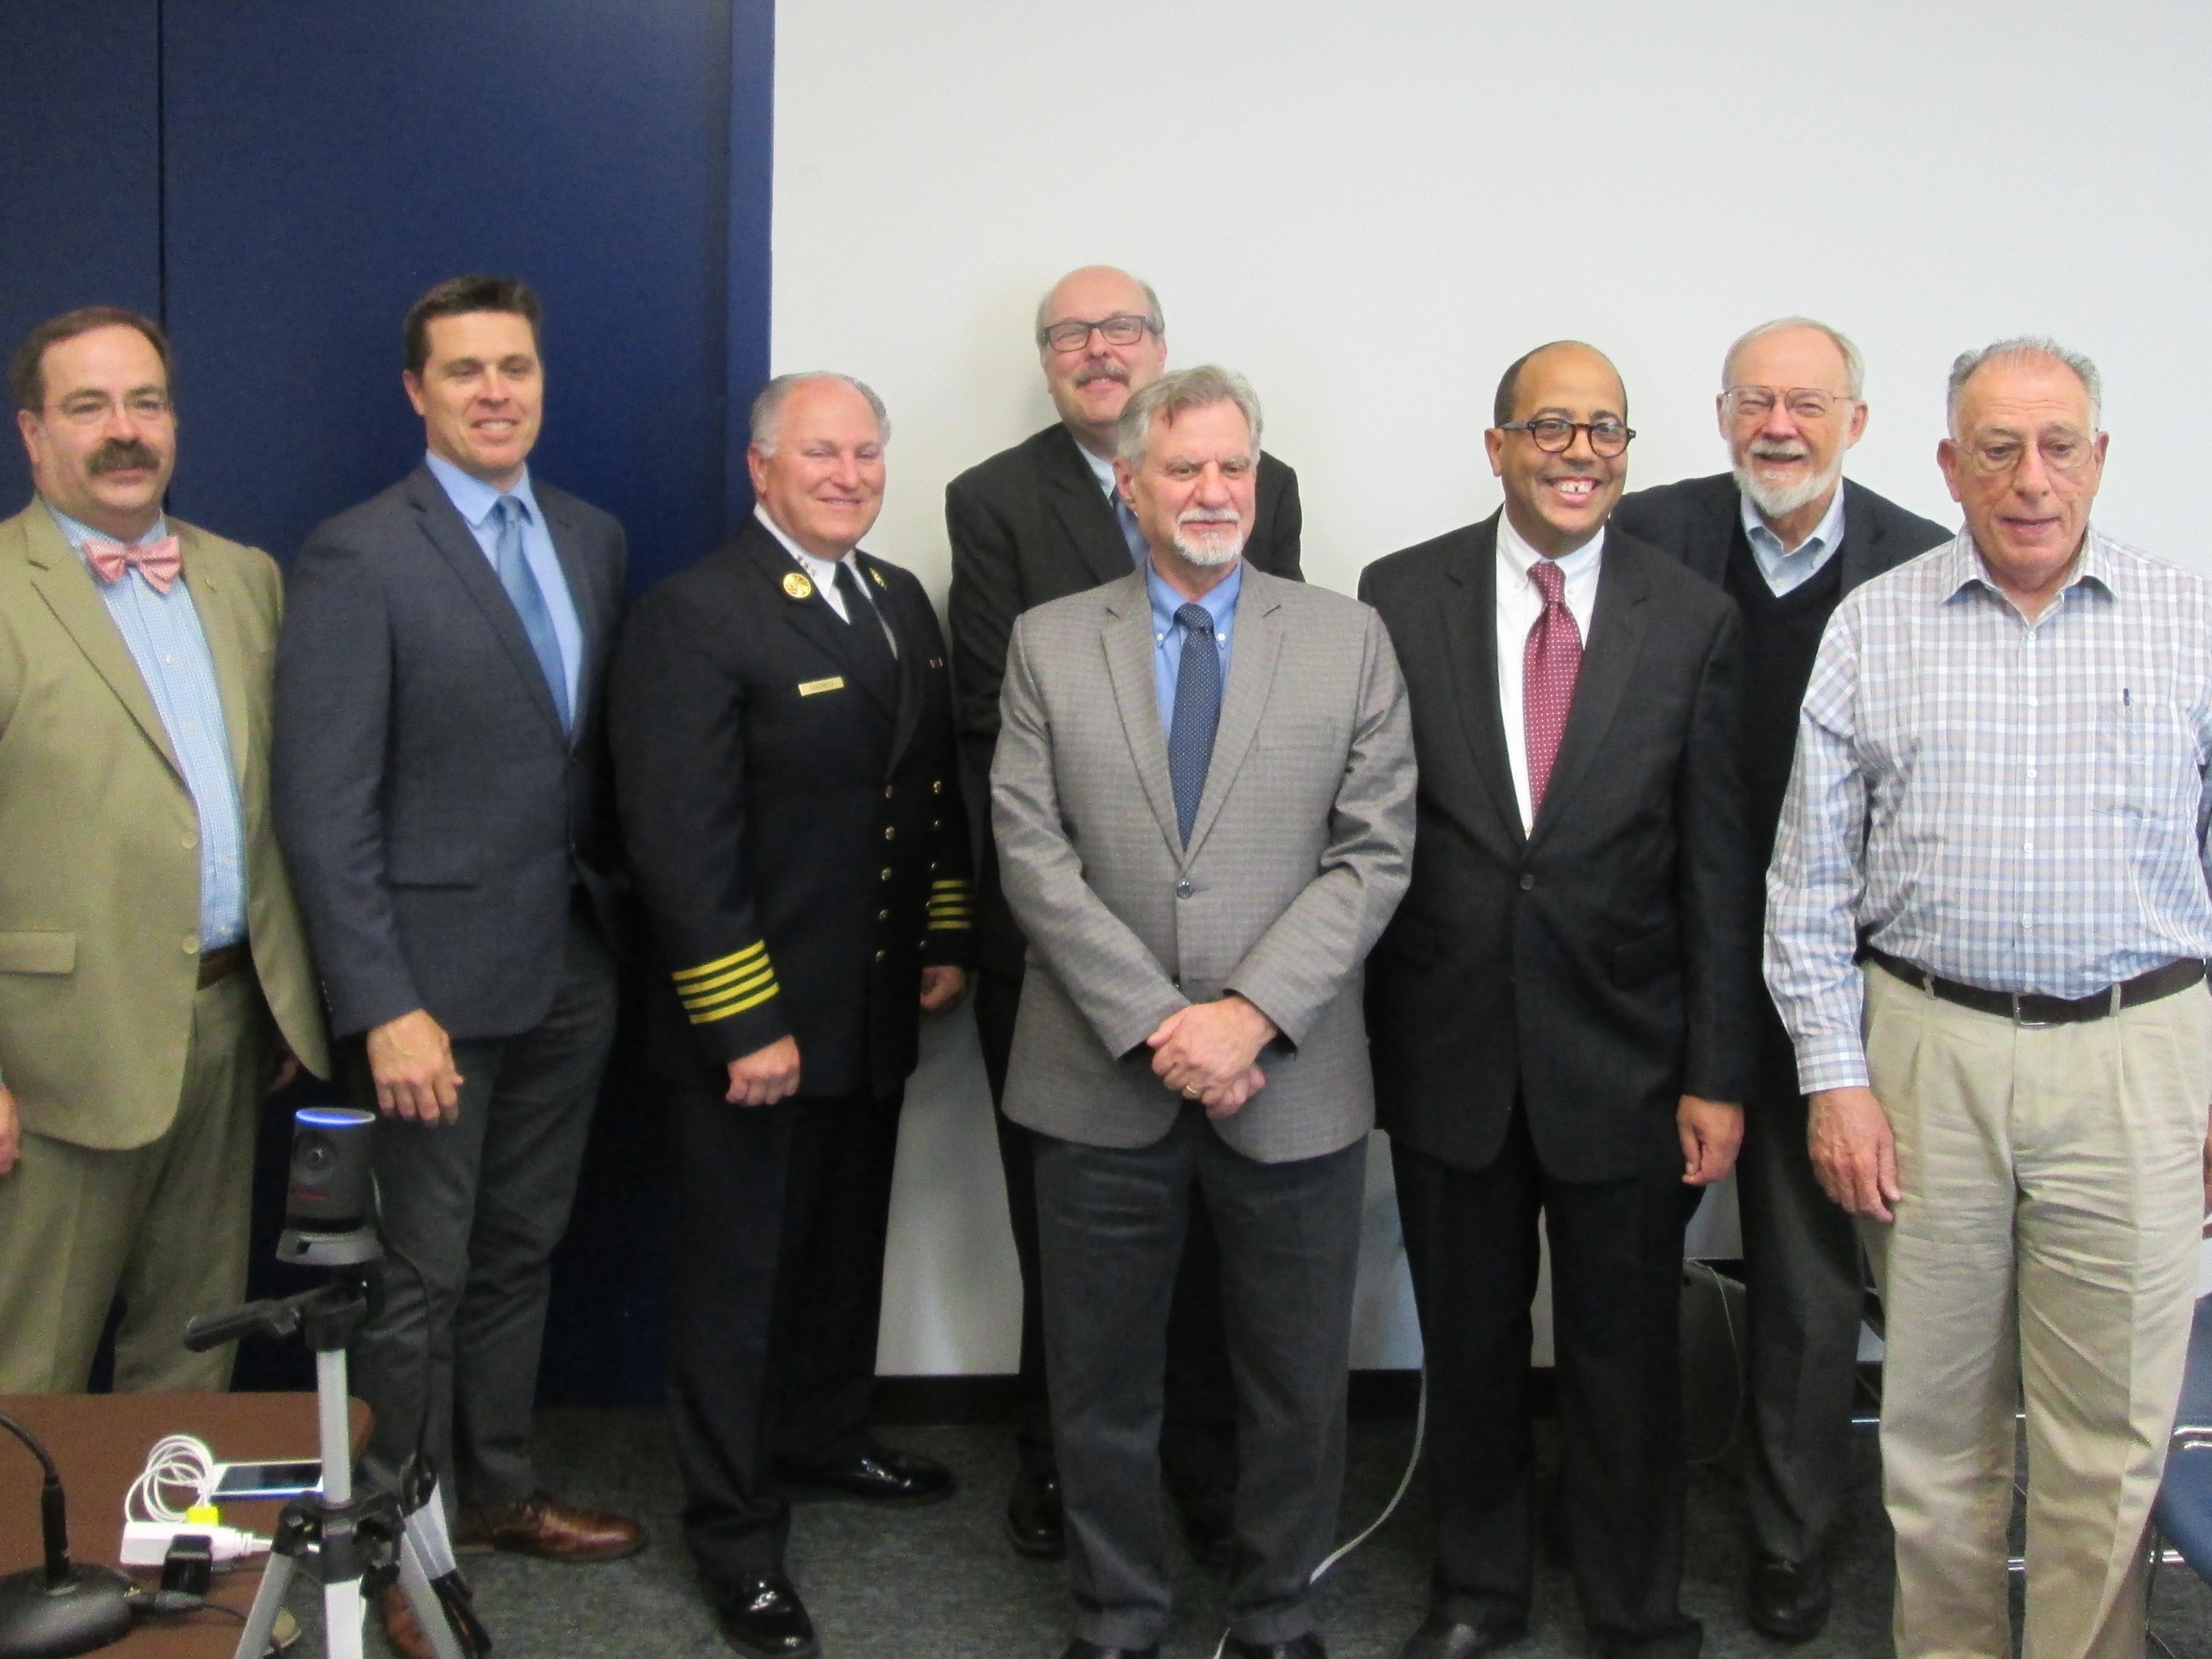 High-Rise Safety Event A Success: Featured International Experts, Cutting Edge Discussion